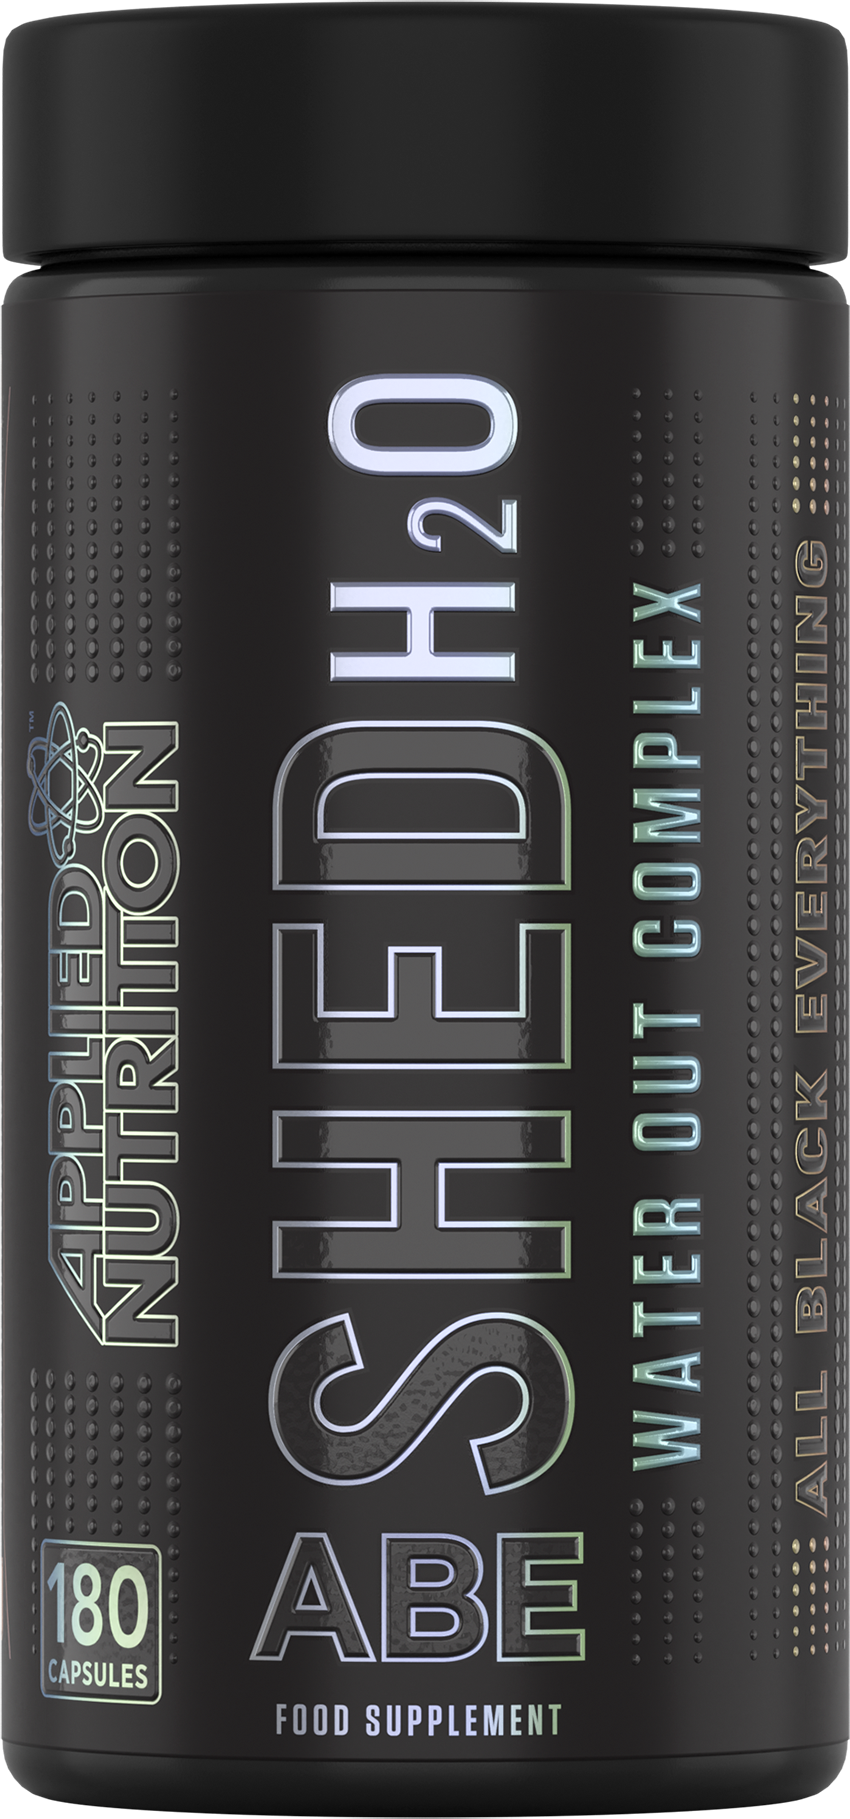 Applied Nutrition ABE Shed H2O - 180 Capsules